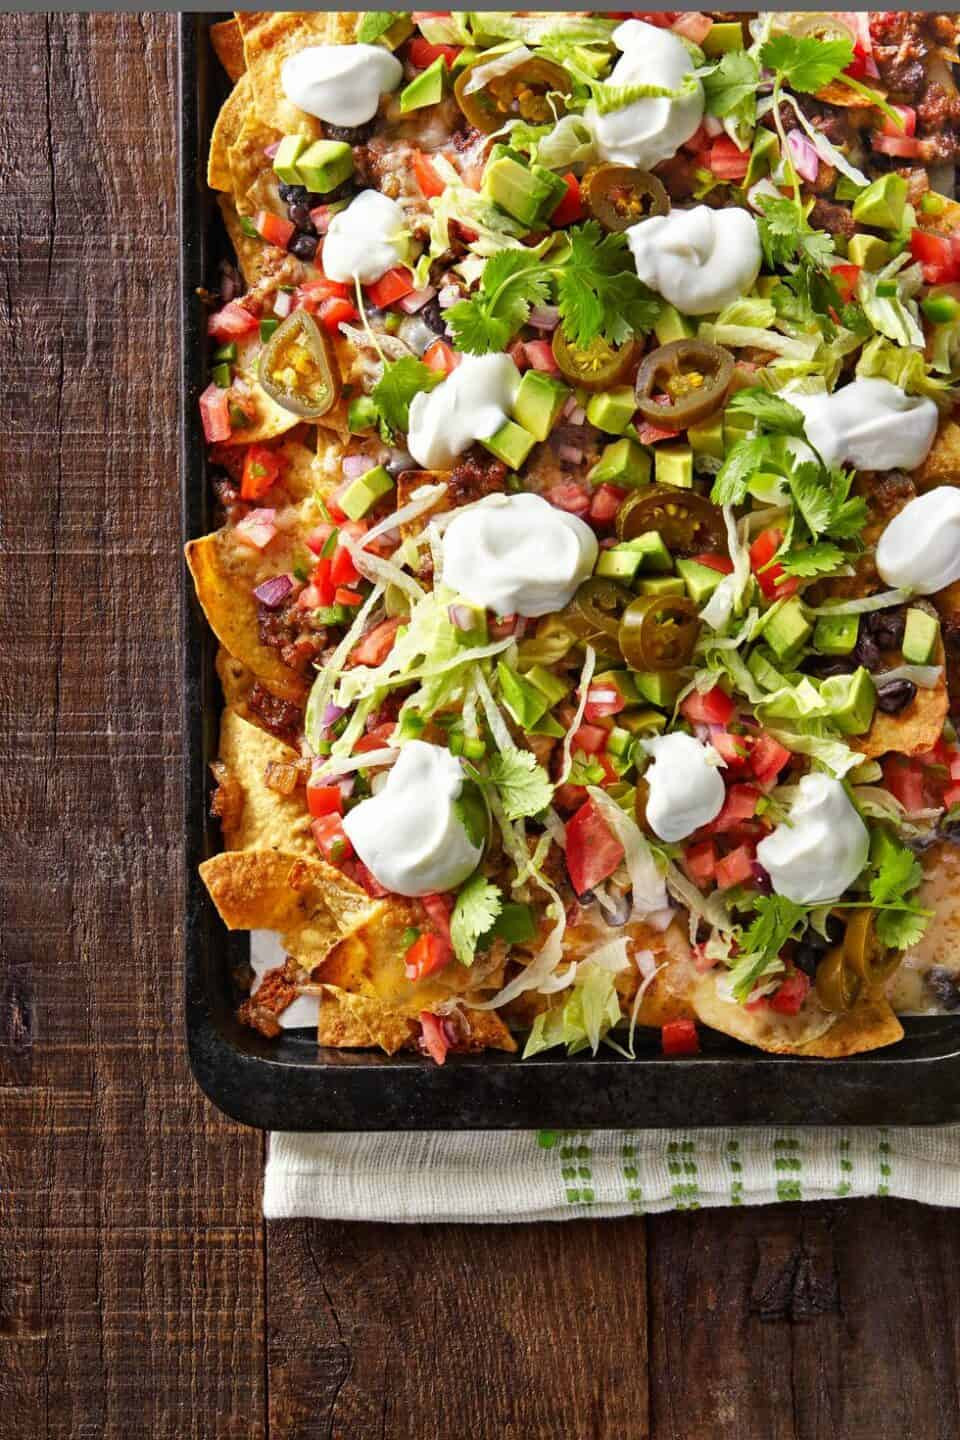 Recipes For Super Bowl Sunday
 25 Super Bowl Recipes to Make on Sunday An Unblurred Lady